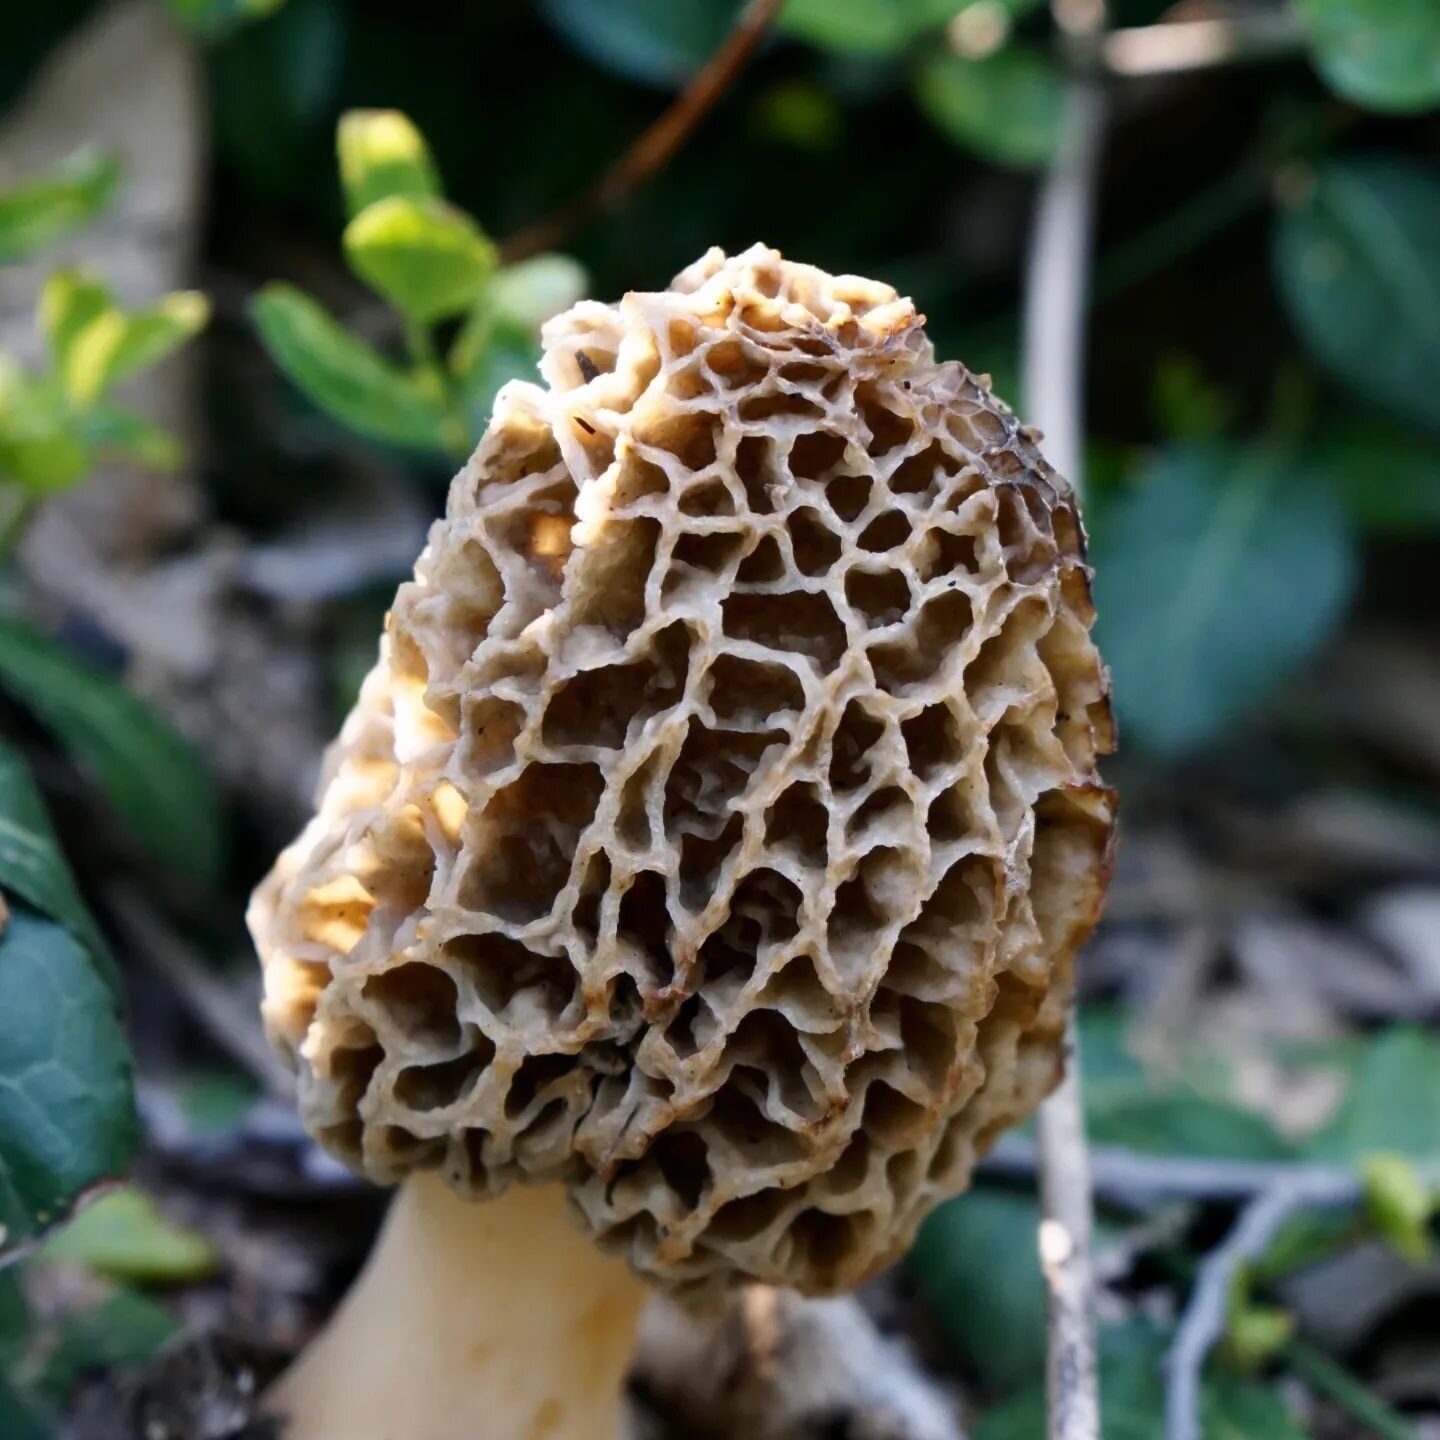 Large burn sites in forested areas are ideal for morel mushroom hunting, especially in burned areas where jack, white or red pine once grew. Grassy and other non forest areas are not as likely to produce morels.

The MI DNR have put together a map of